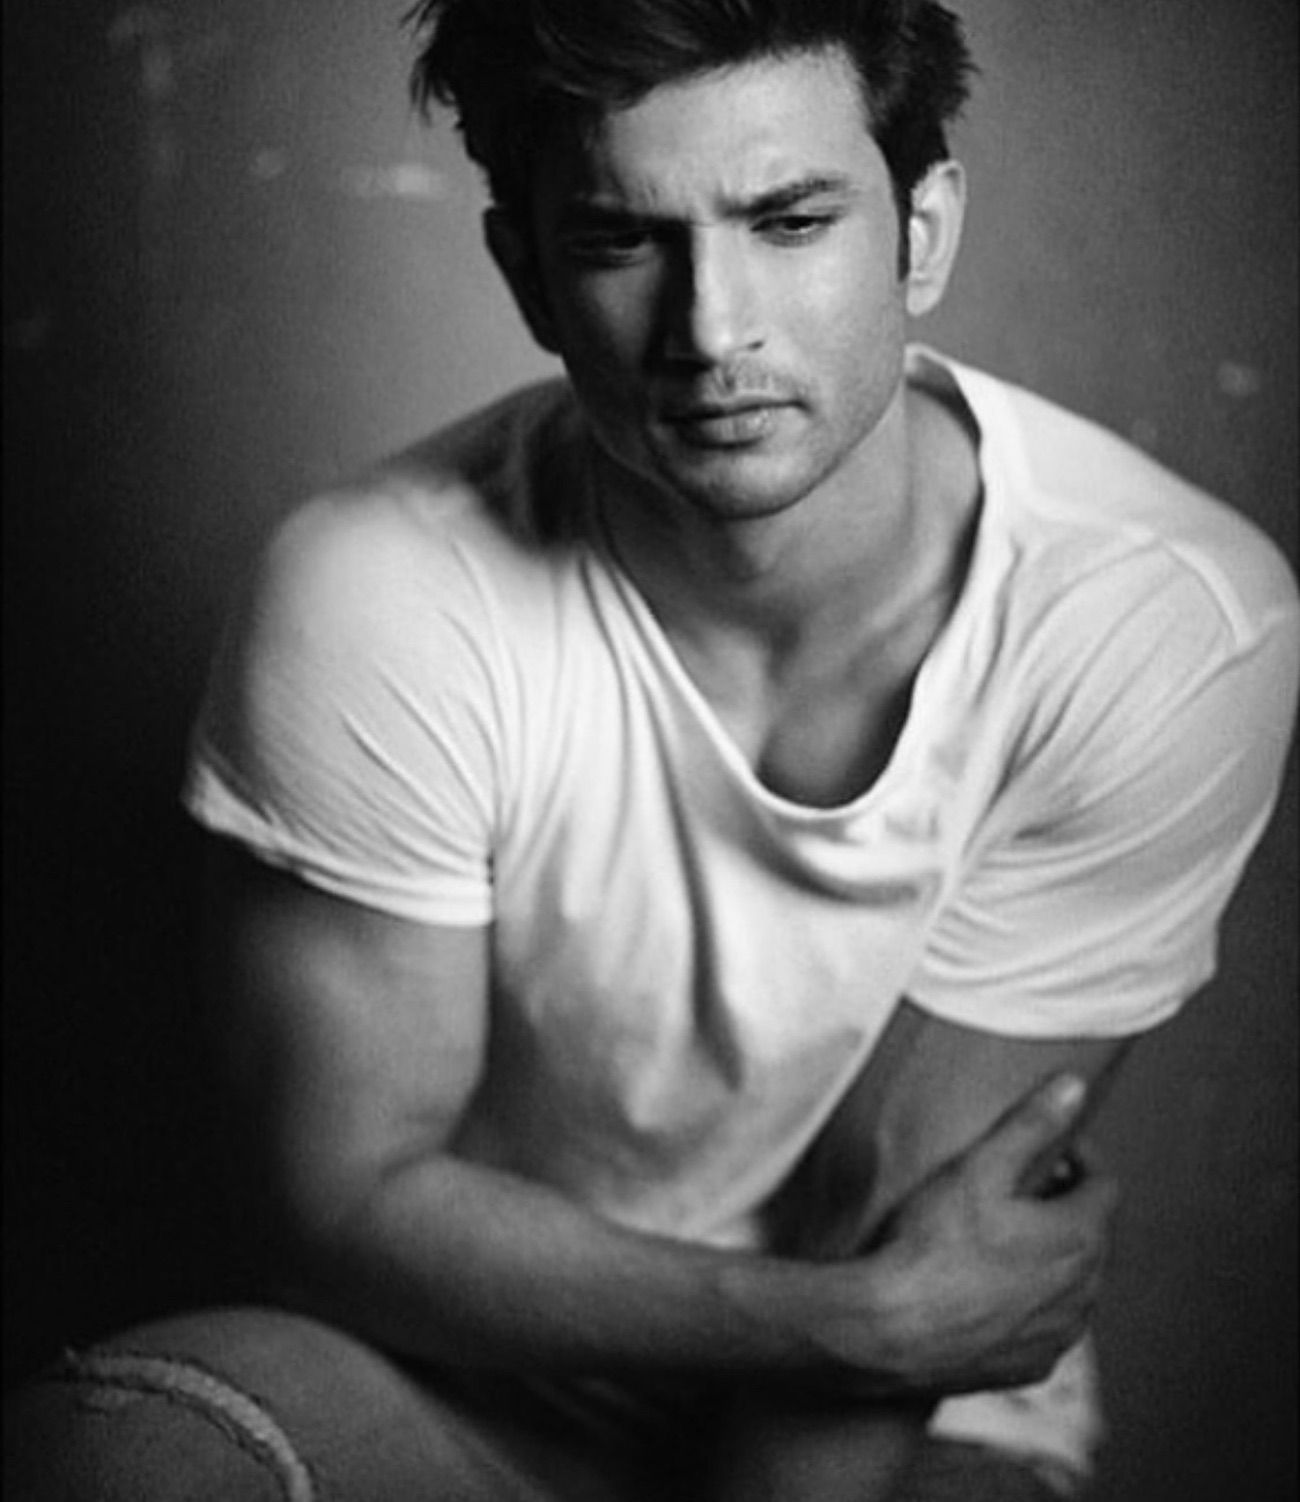 Sushant Singh Rajput Case: Actor's Mental Health May Have Deteriorated Due To Prescription Given By Sisters - Mumbai Police To HC